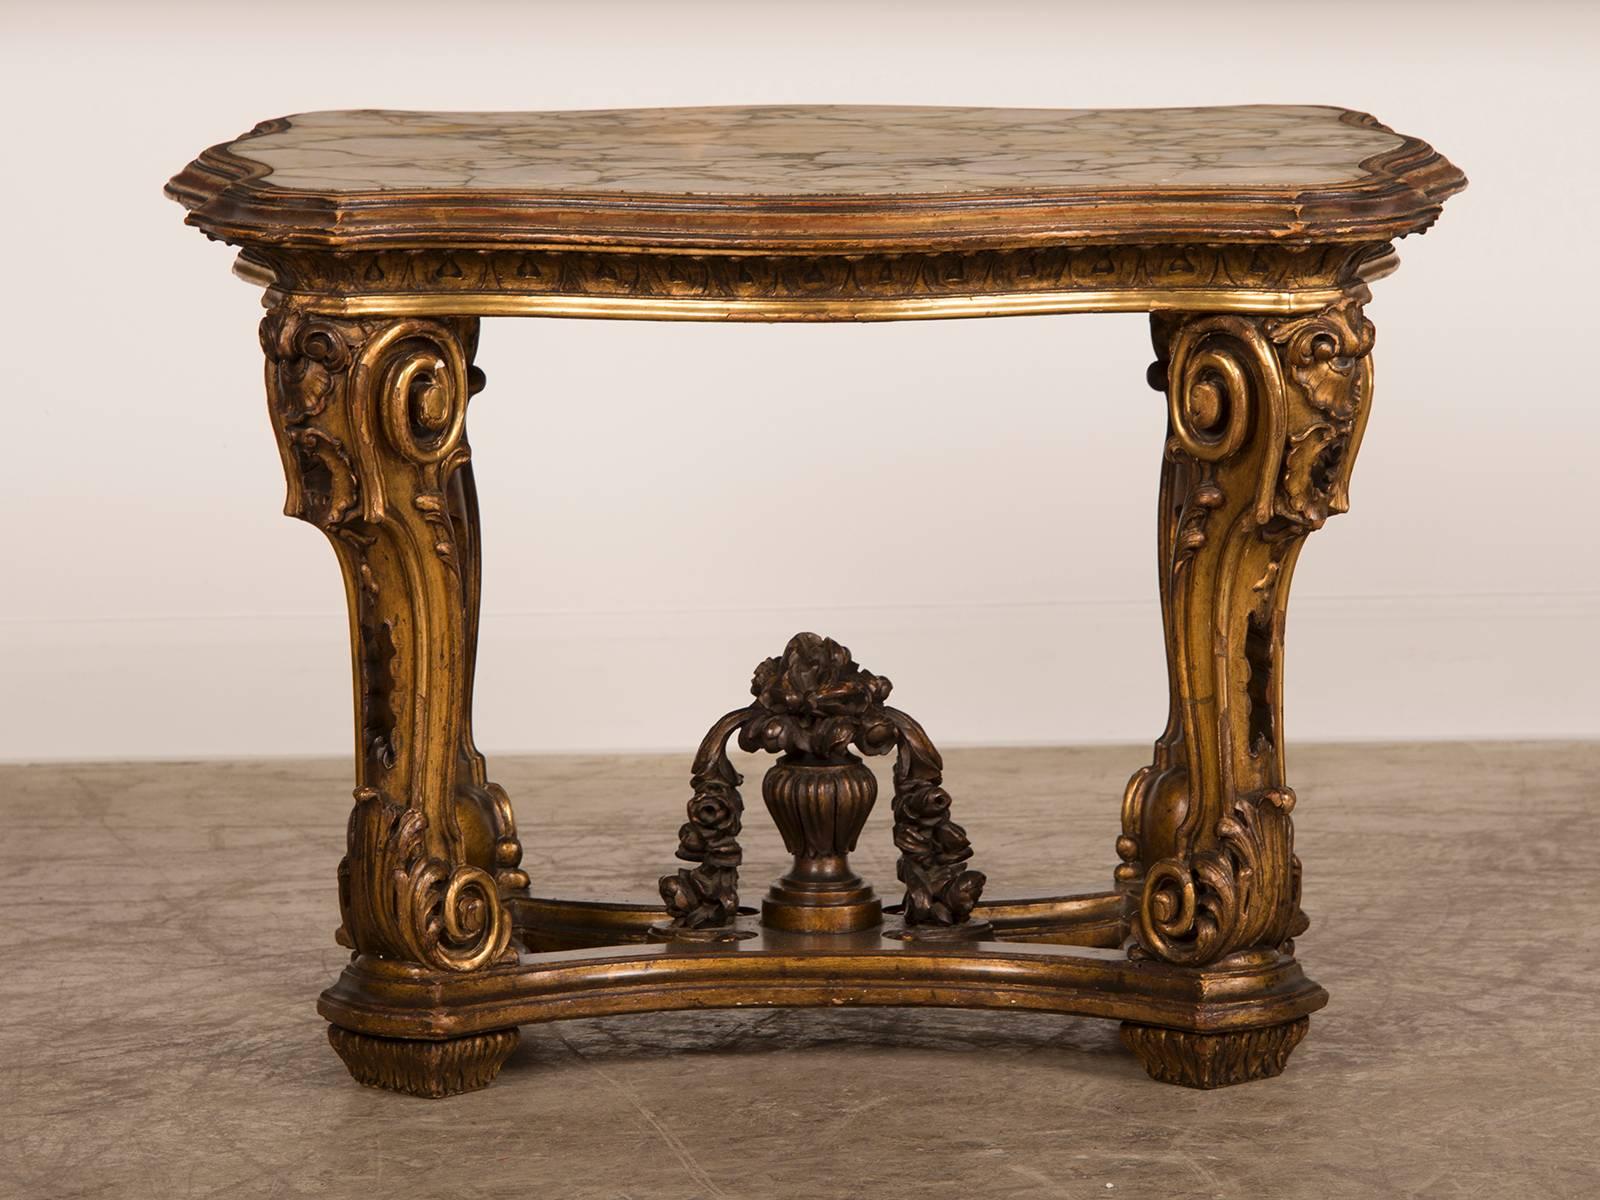 Marble Antique Italian Gilded Wood Table from the Belle Epoque Period, circa 1890